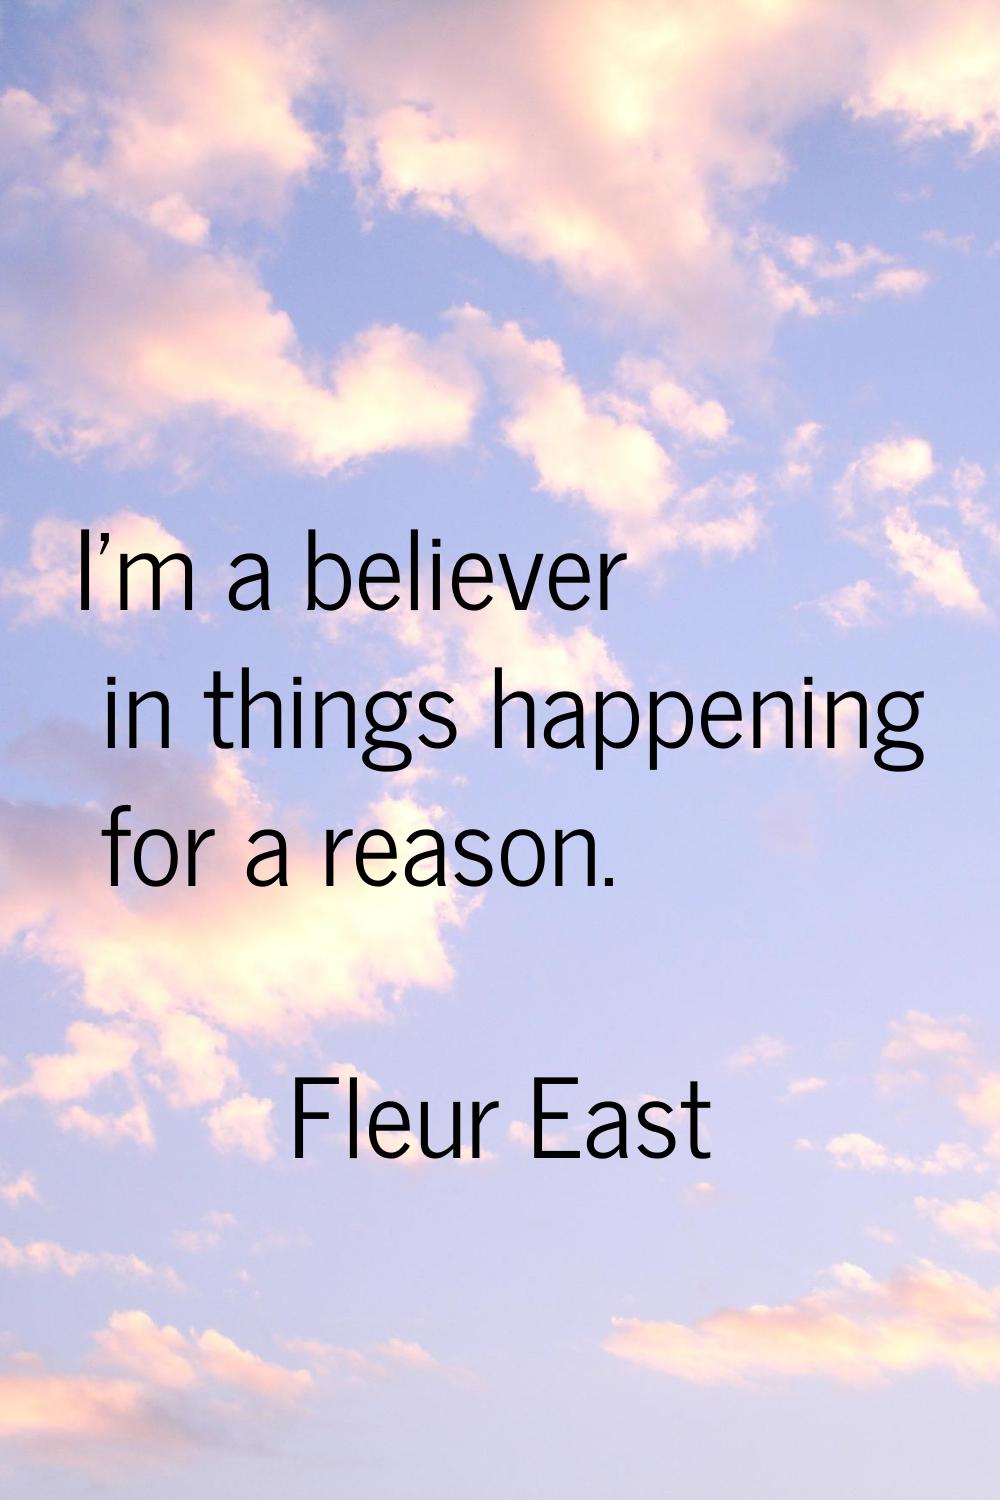 I'm a believer in things happening for a reason.